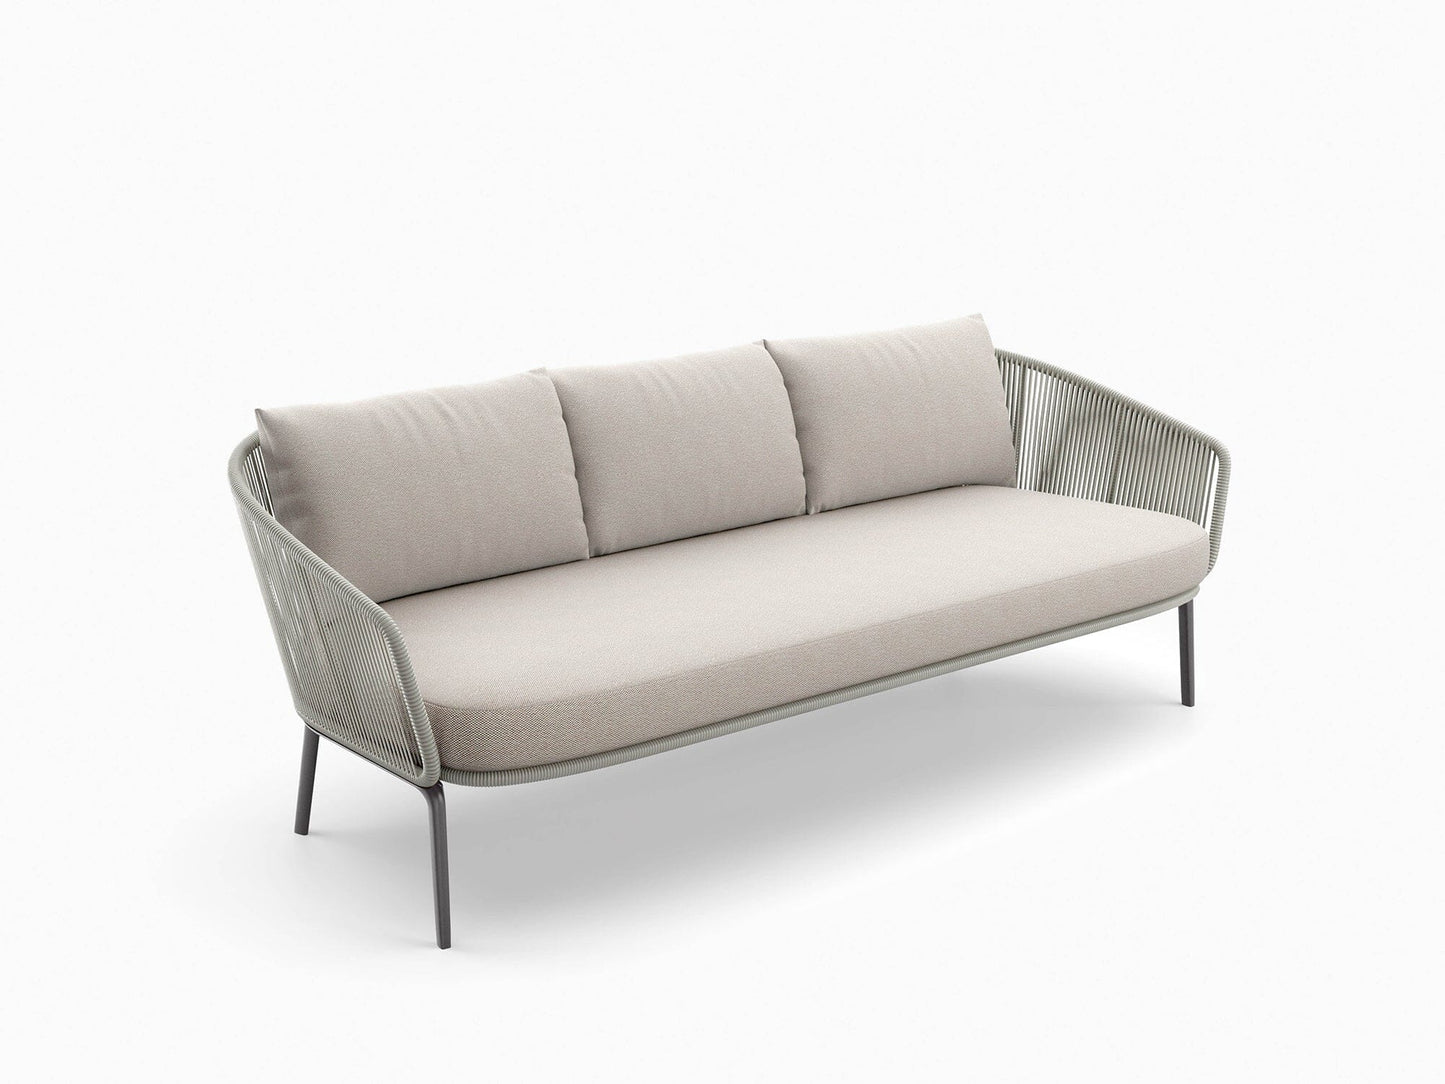 RILLY Sofa in Taupe Melange 30% Off Outdoor Furniture DEDON 